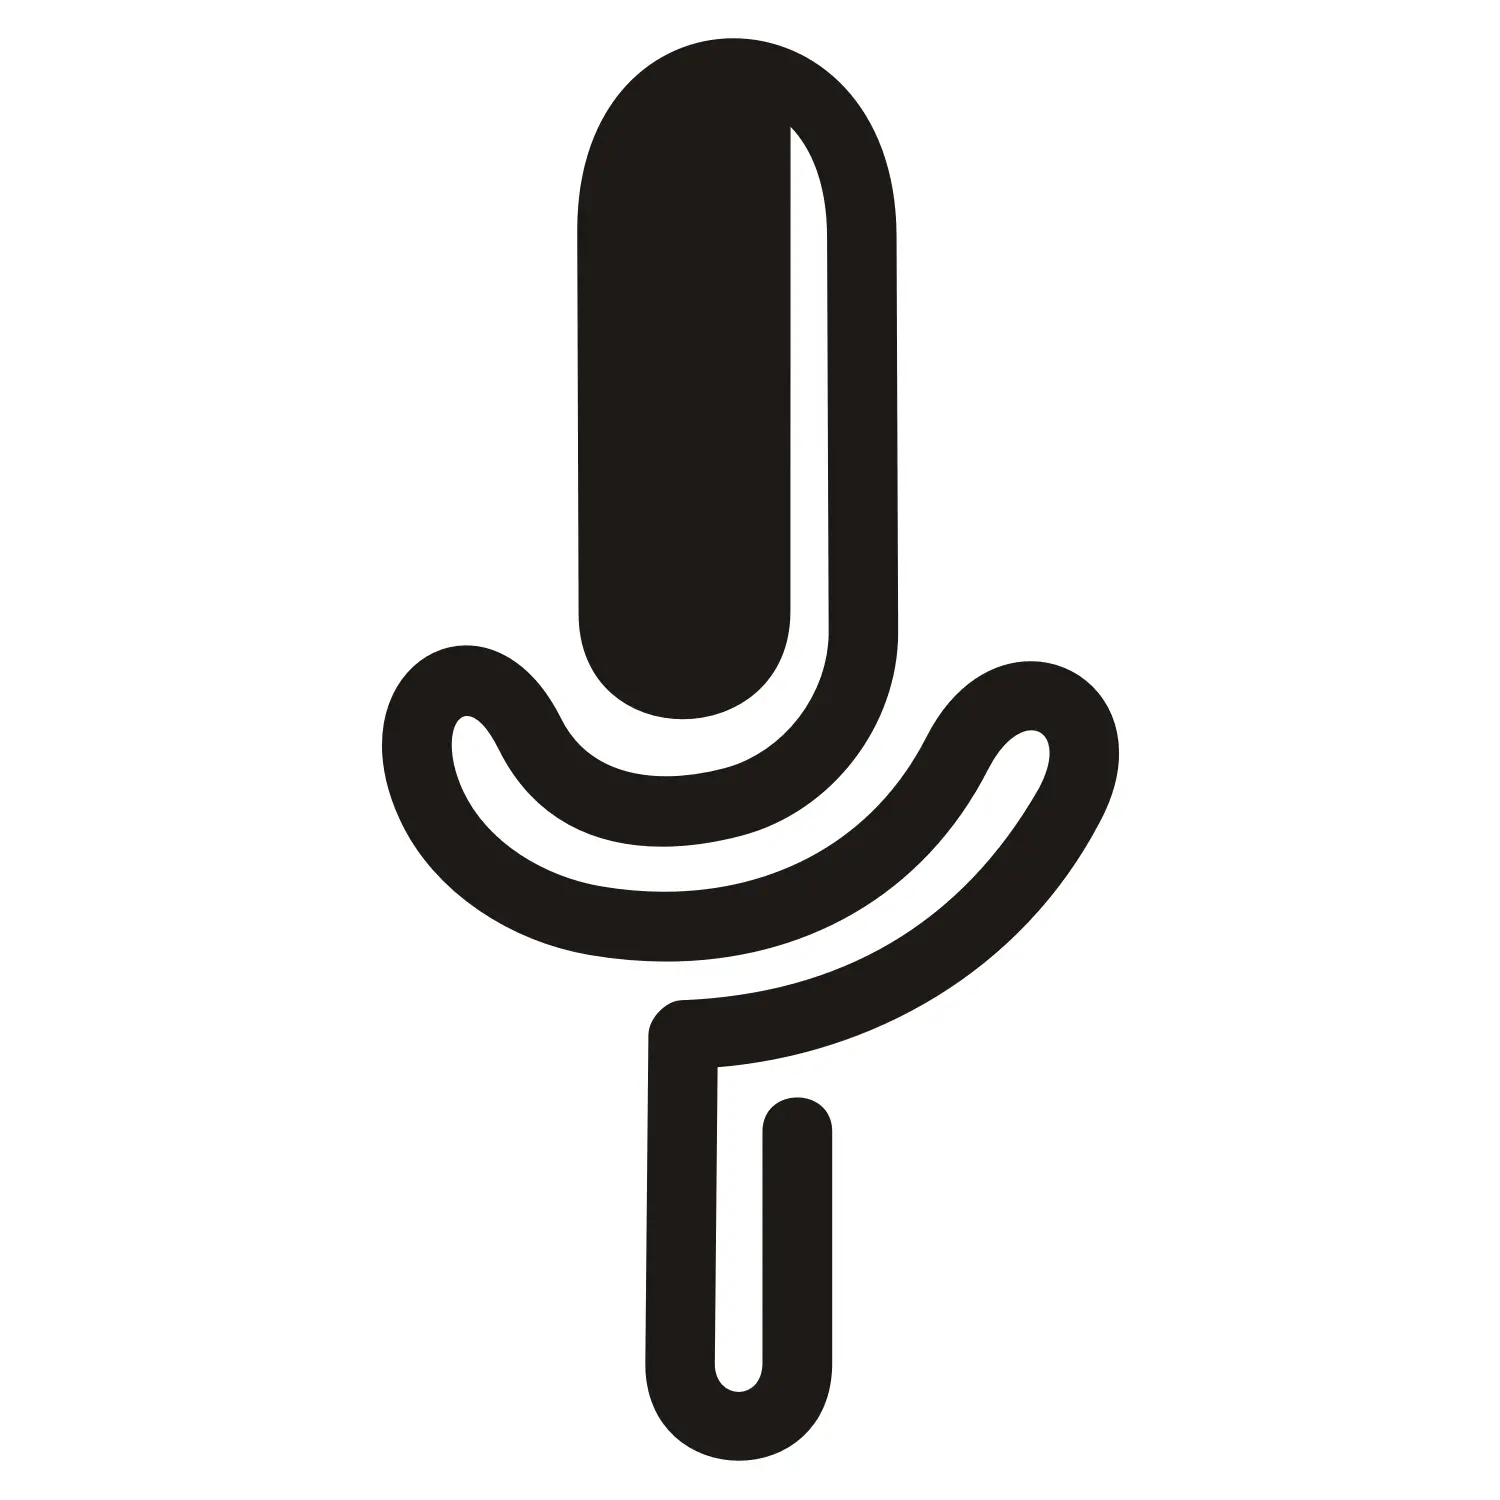 Microphone Png Clipart